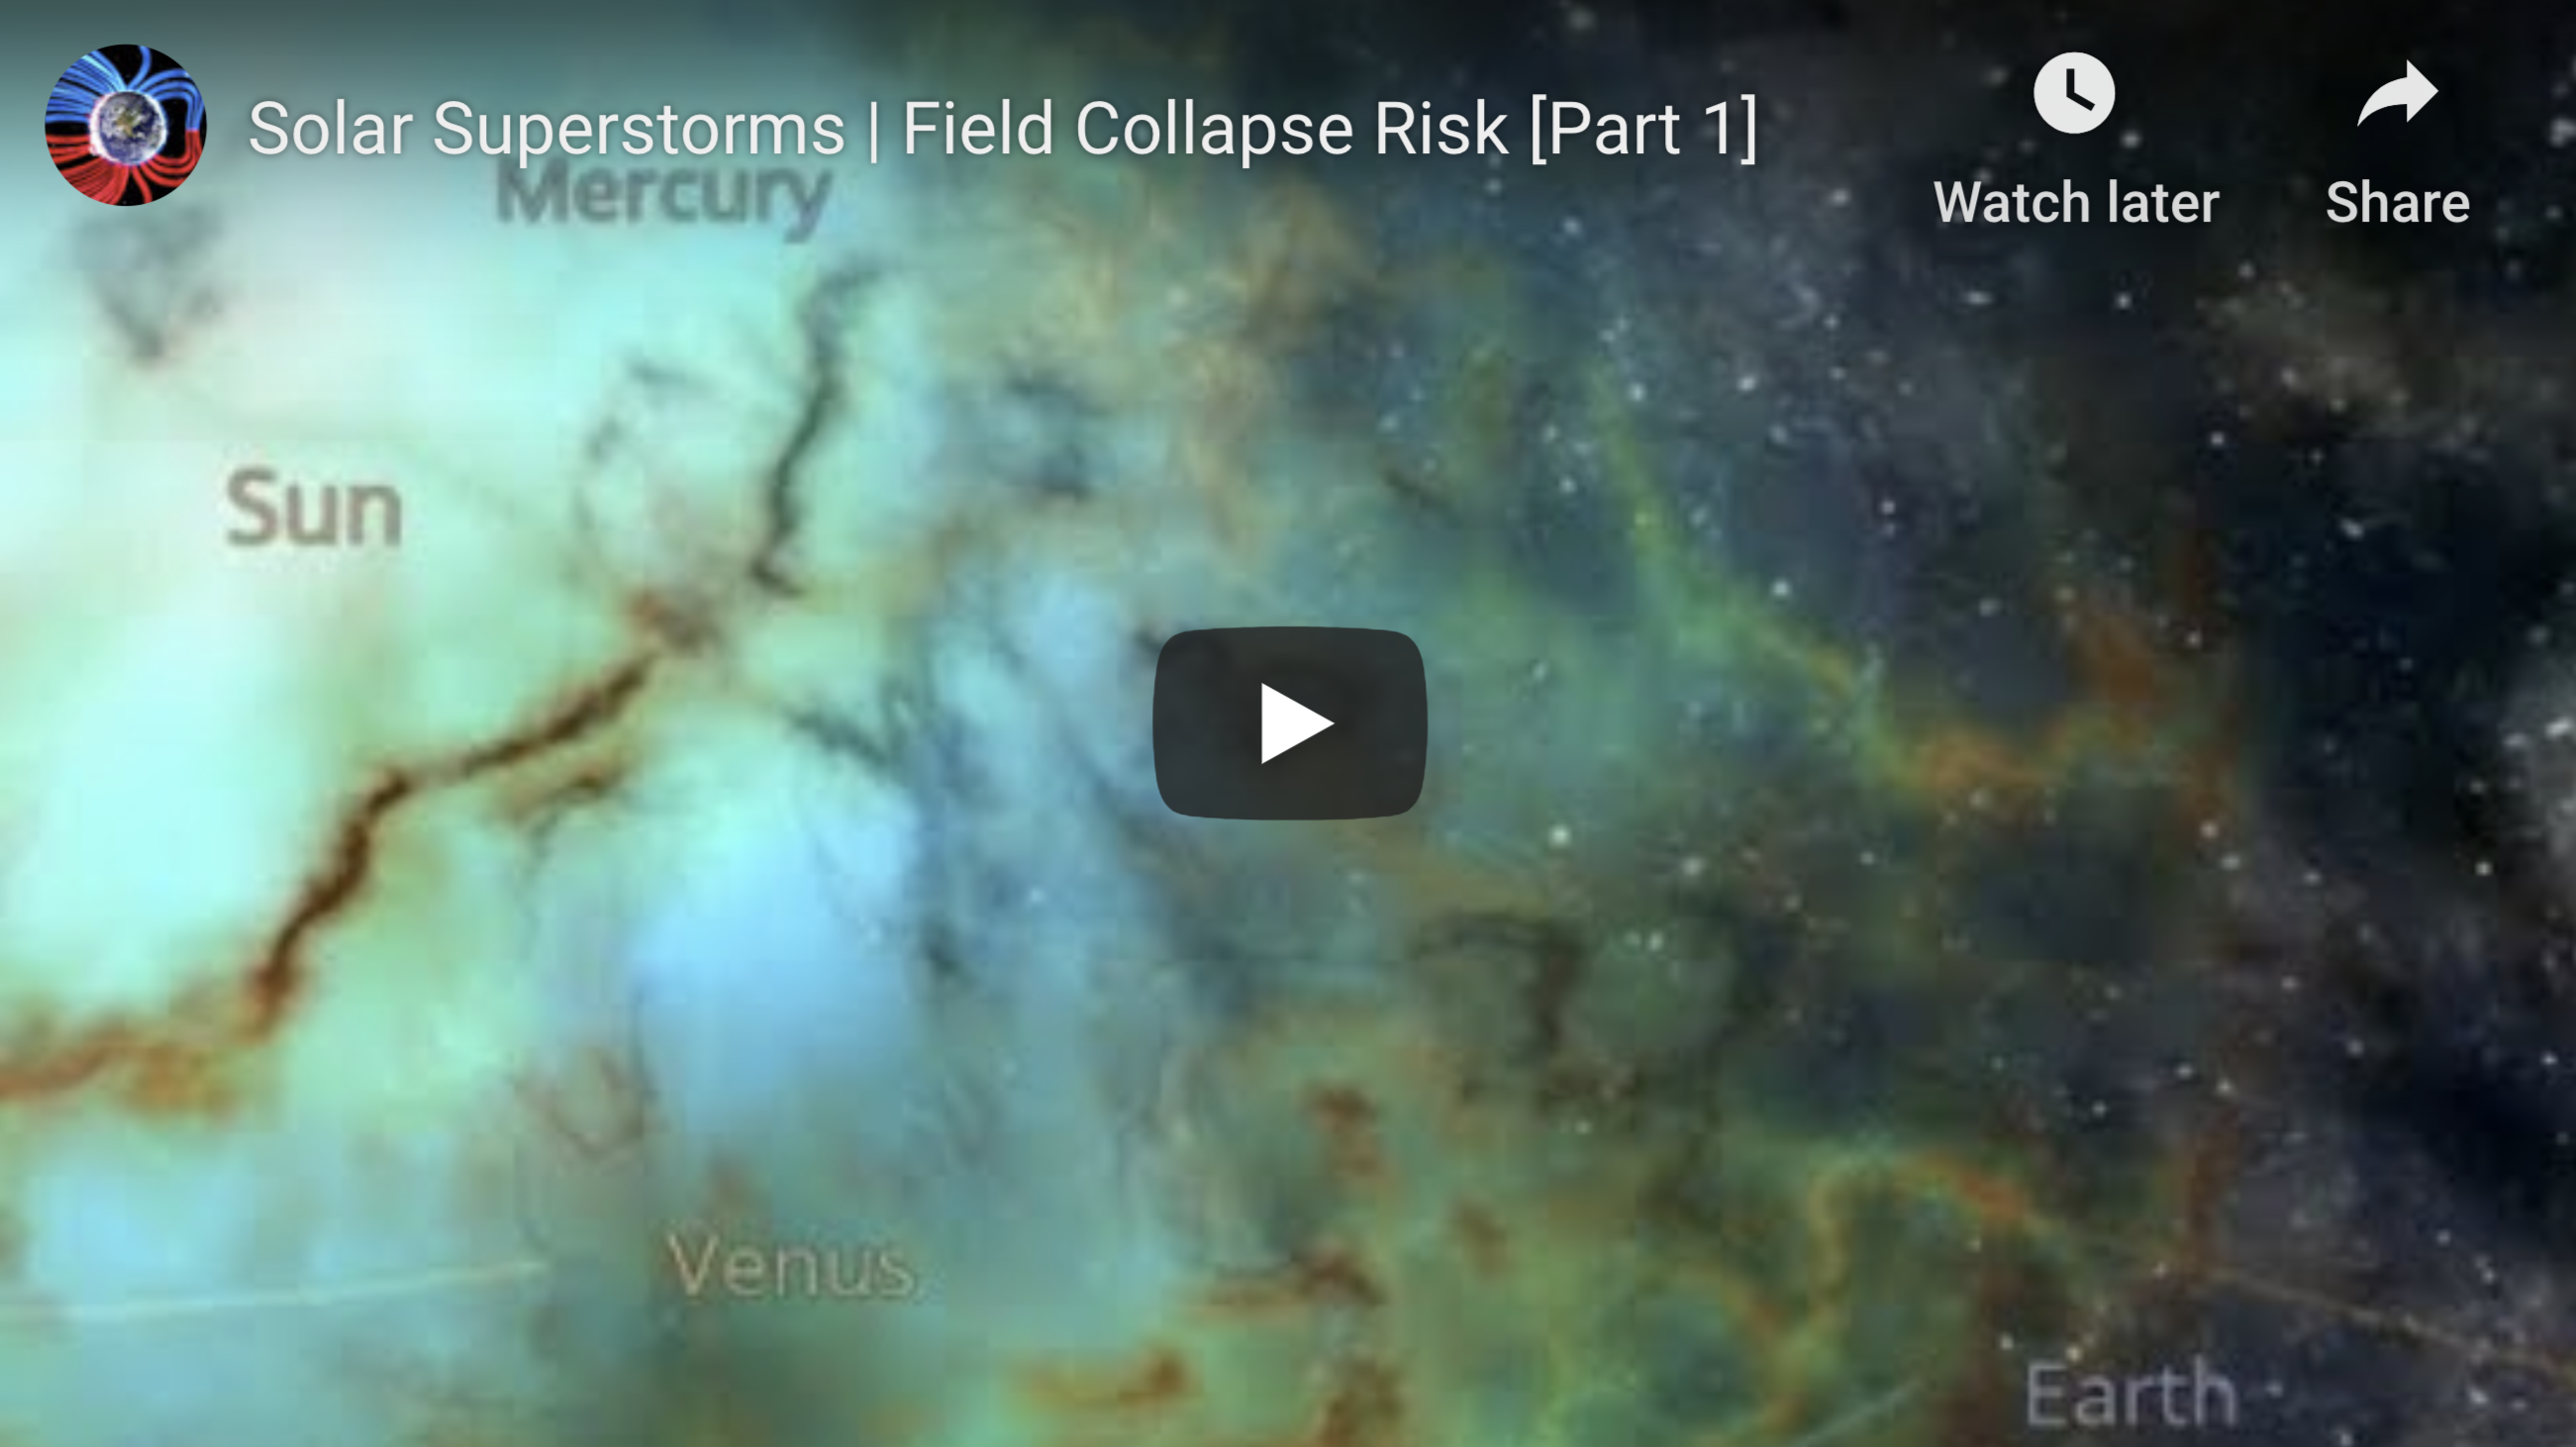 Solar Superstorms Field Collapse Risk Part 1 4 28 2020